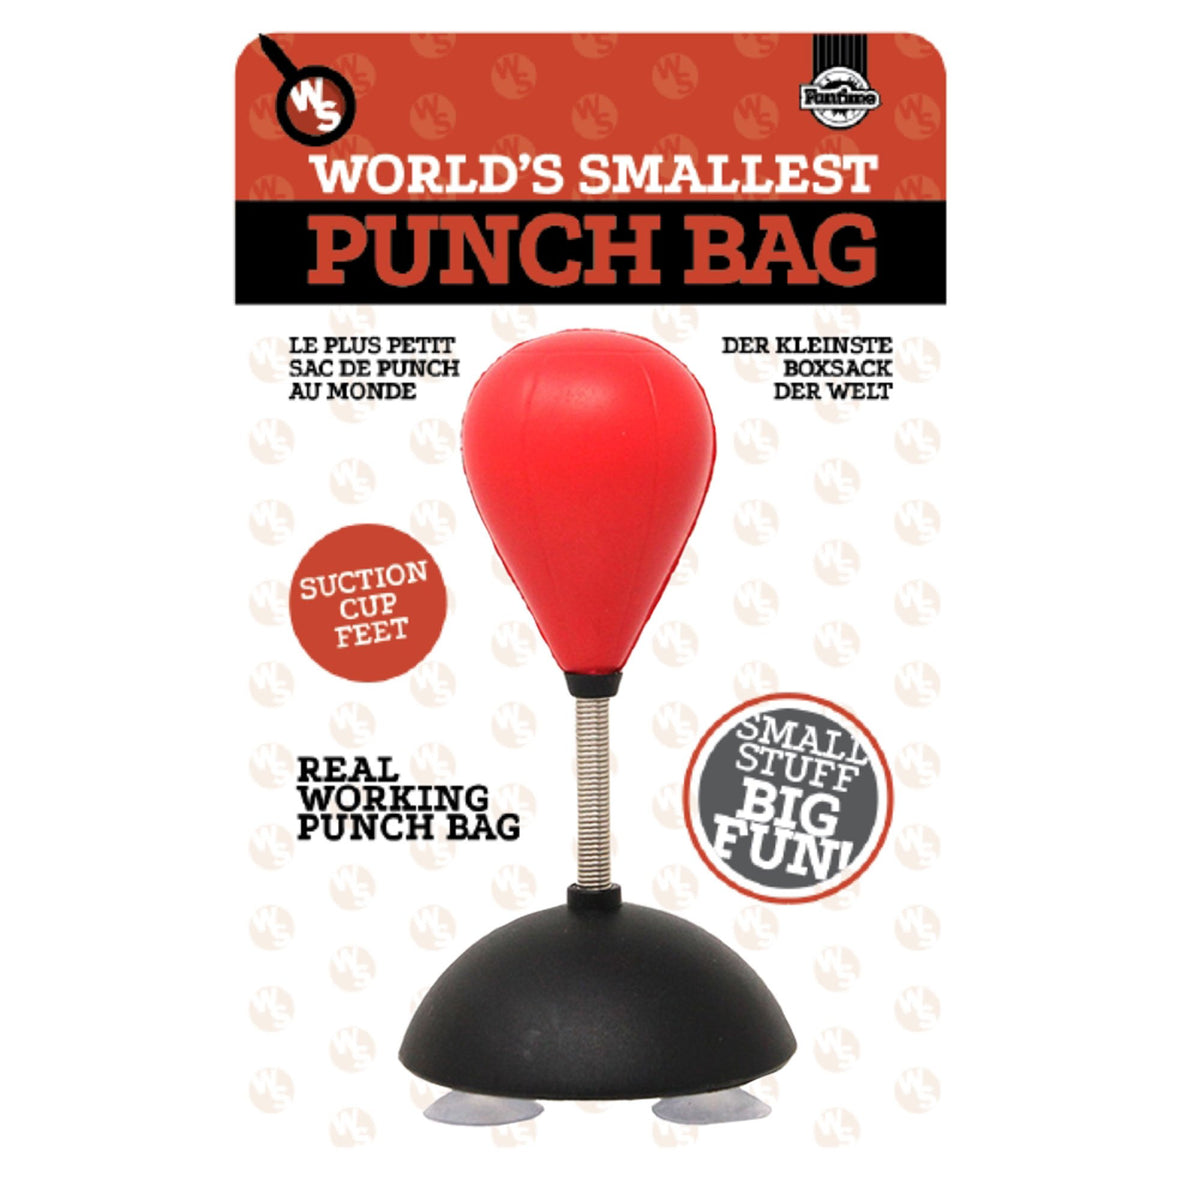 Worlds Smallest Punching Bag (by Westminster)